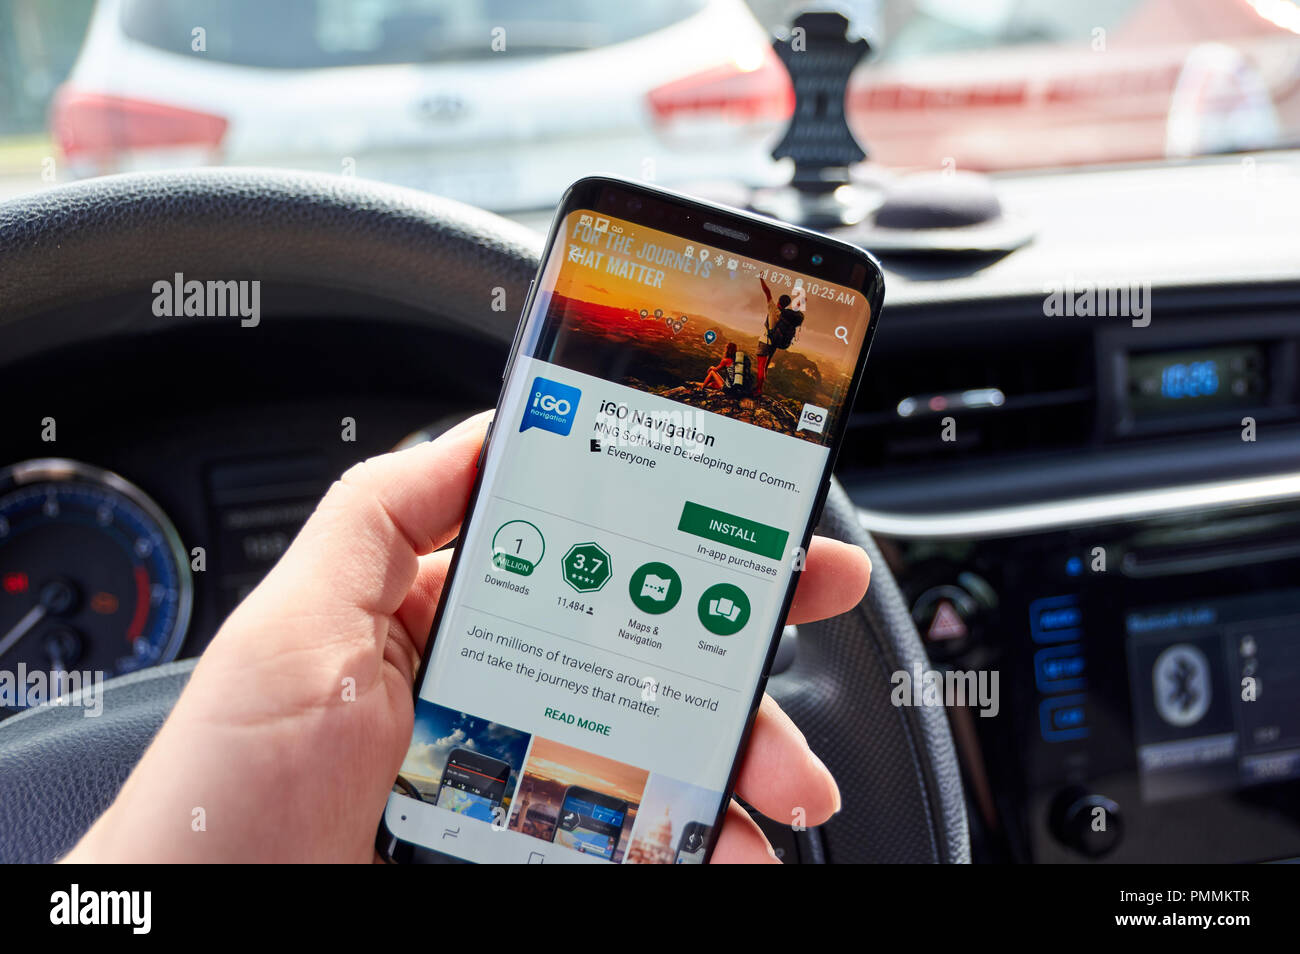 MONTREAL, CANADA - AUGUST 8, 2018: IGO Navigation application on a cell  phone screen in a car. IGO is one of the popular gps navigation services  Stock Photo - Alamy